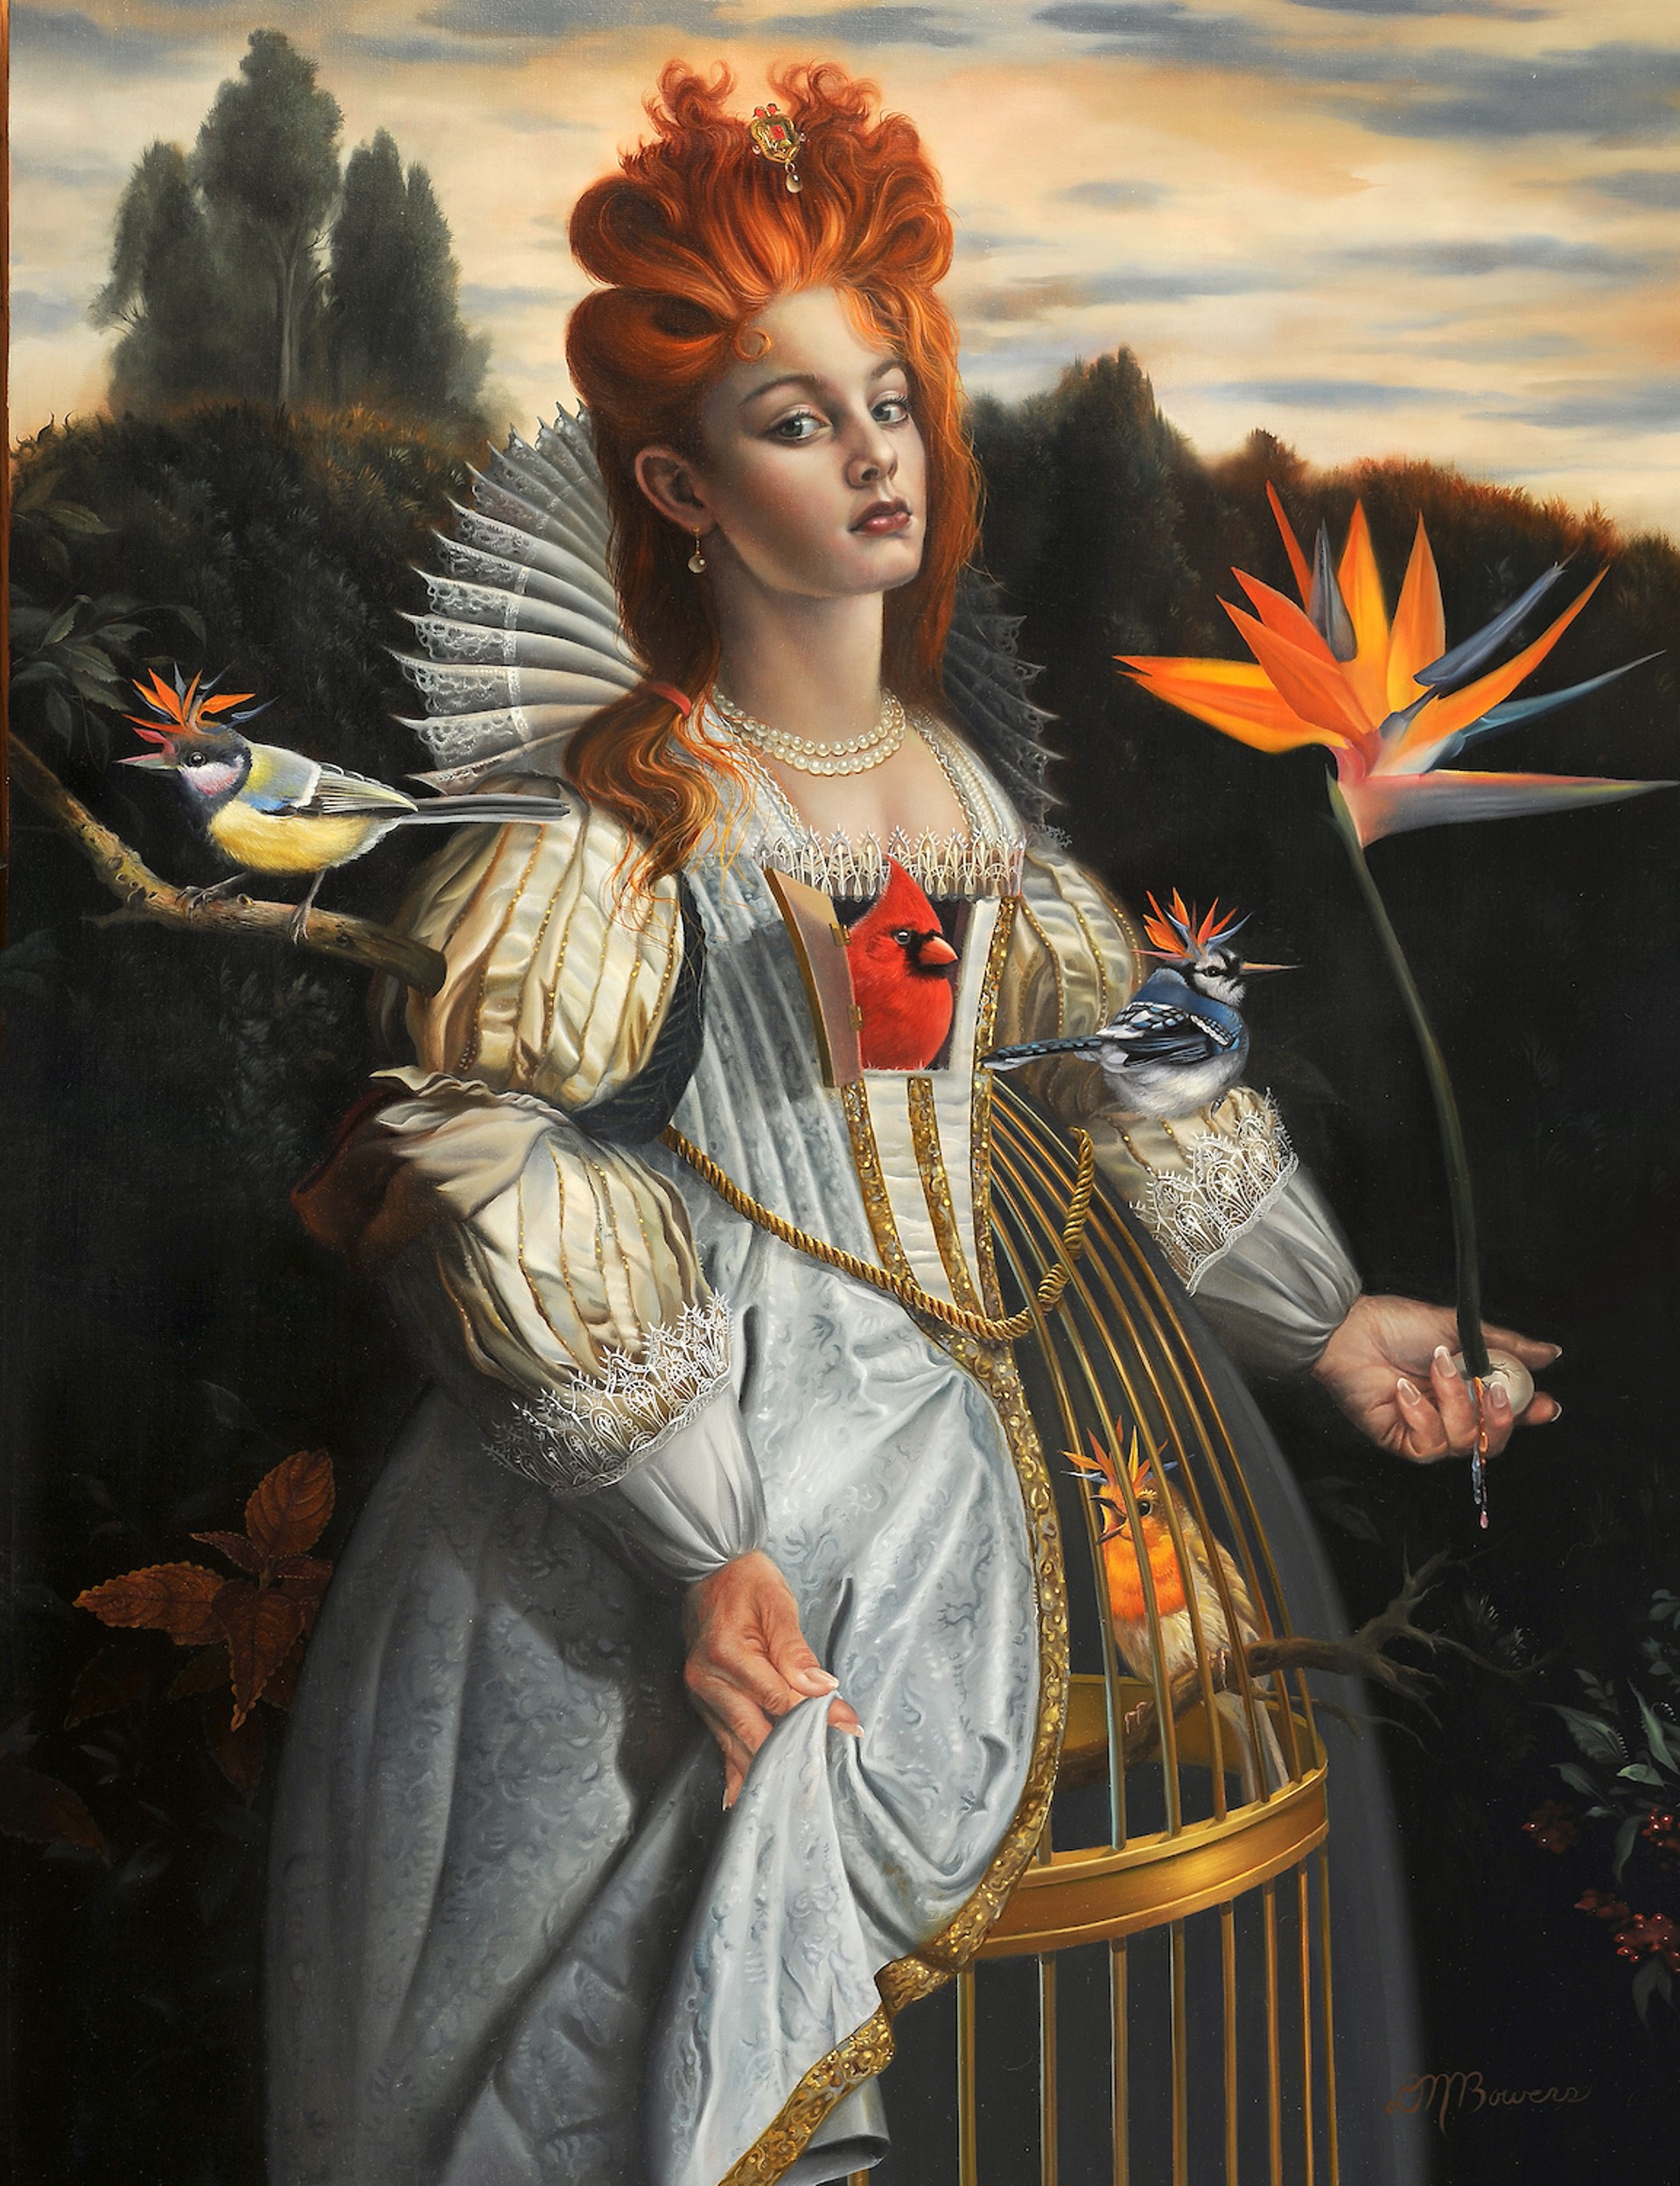 Birds of Paradise by David Michael Bowers